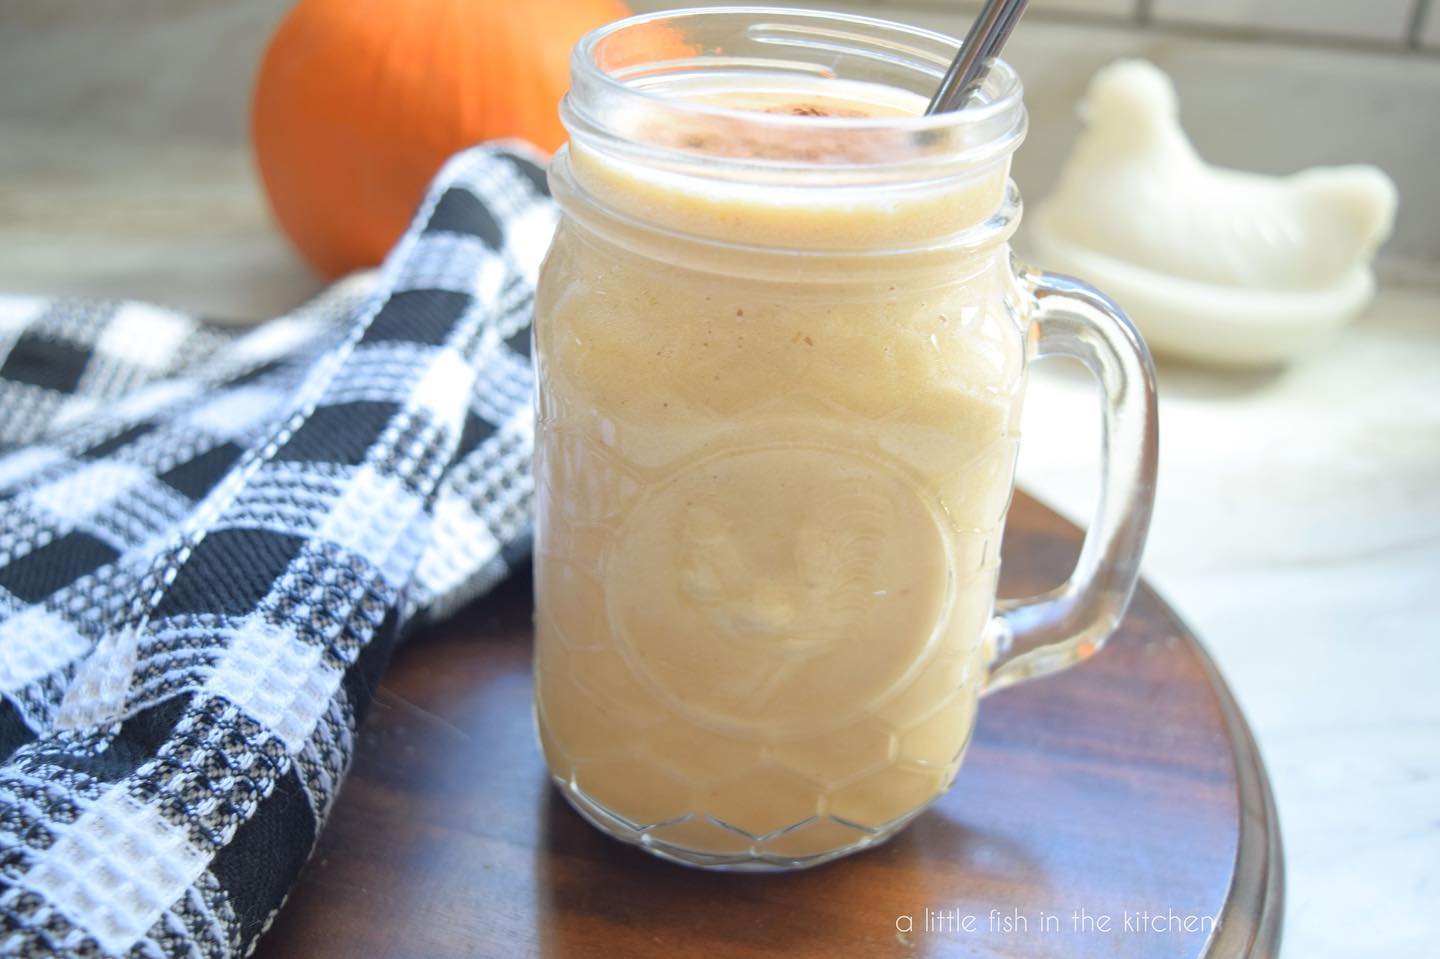 This Pumpkin Maple Protein Smoothie is a festive, seasonal flavor combination in a glass. 🎃🍁😊 Made with banana, pumpkin puree, vanilla protein powder, almond milk and a hint of maple, it's also a delicious and satisfying way to start any day! Link to the recipe is in my bio! #proteinsmoothie #pumpkinsmoothie #whatsforbreakfast #recipeideas 
#yougottaeatthis #delicious